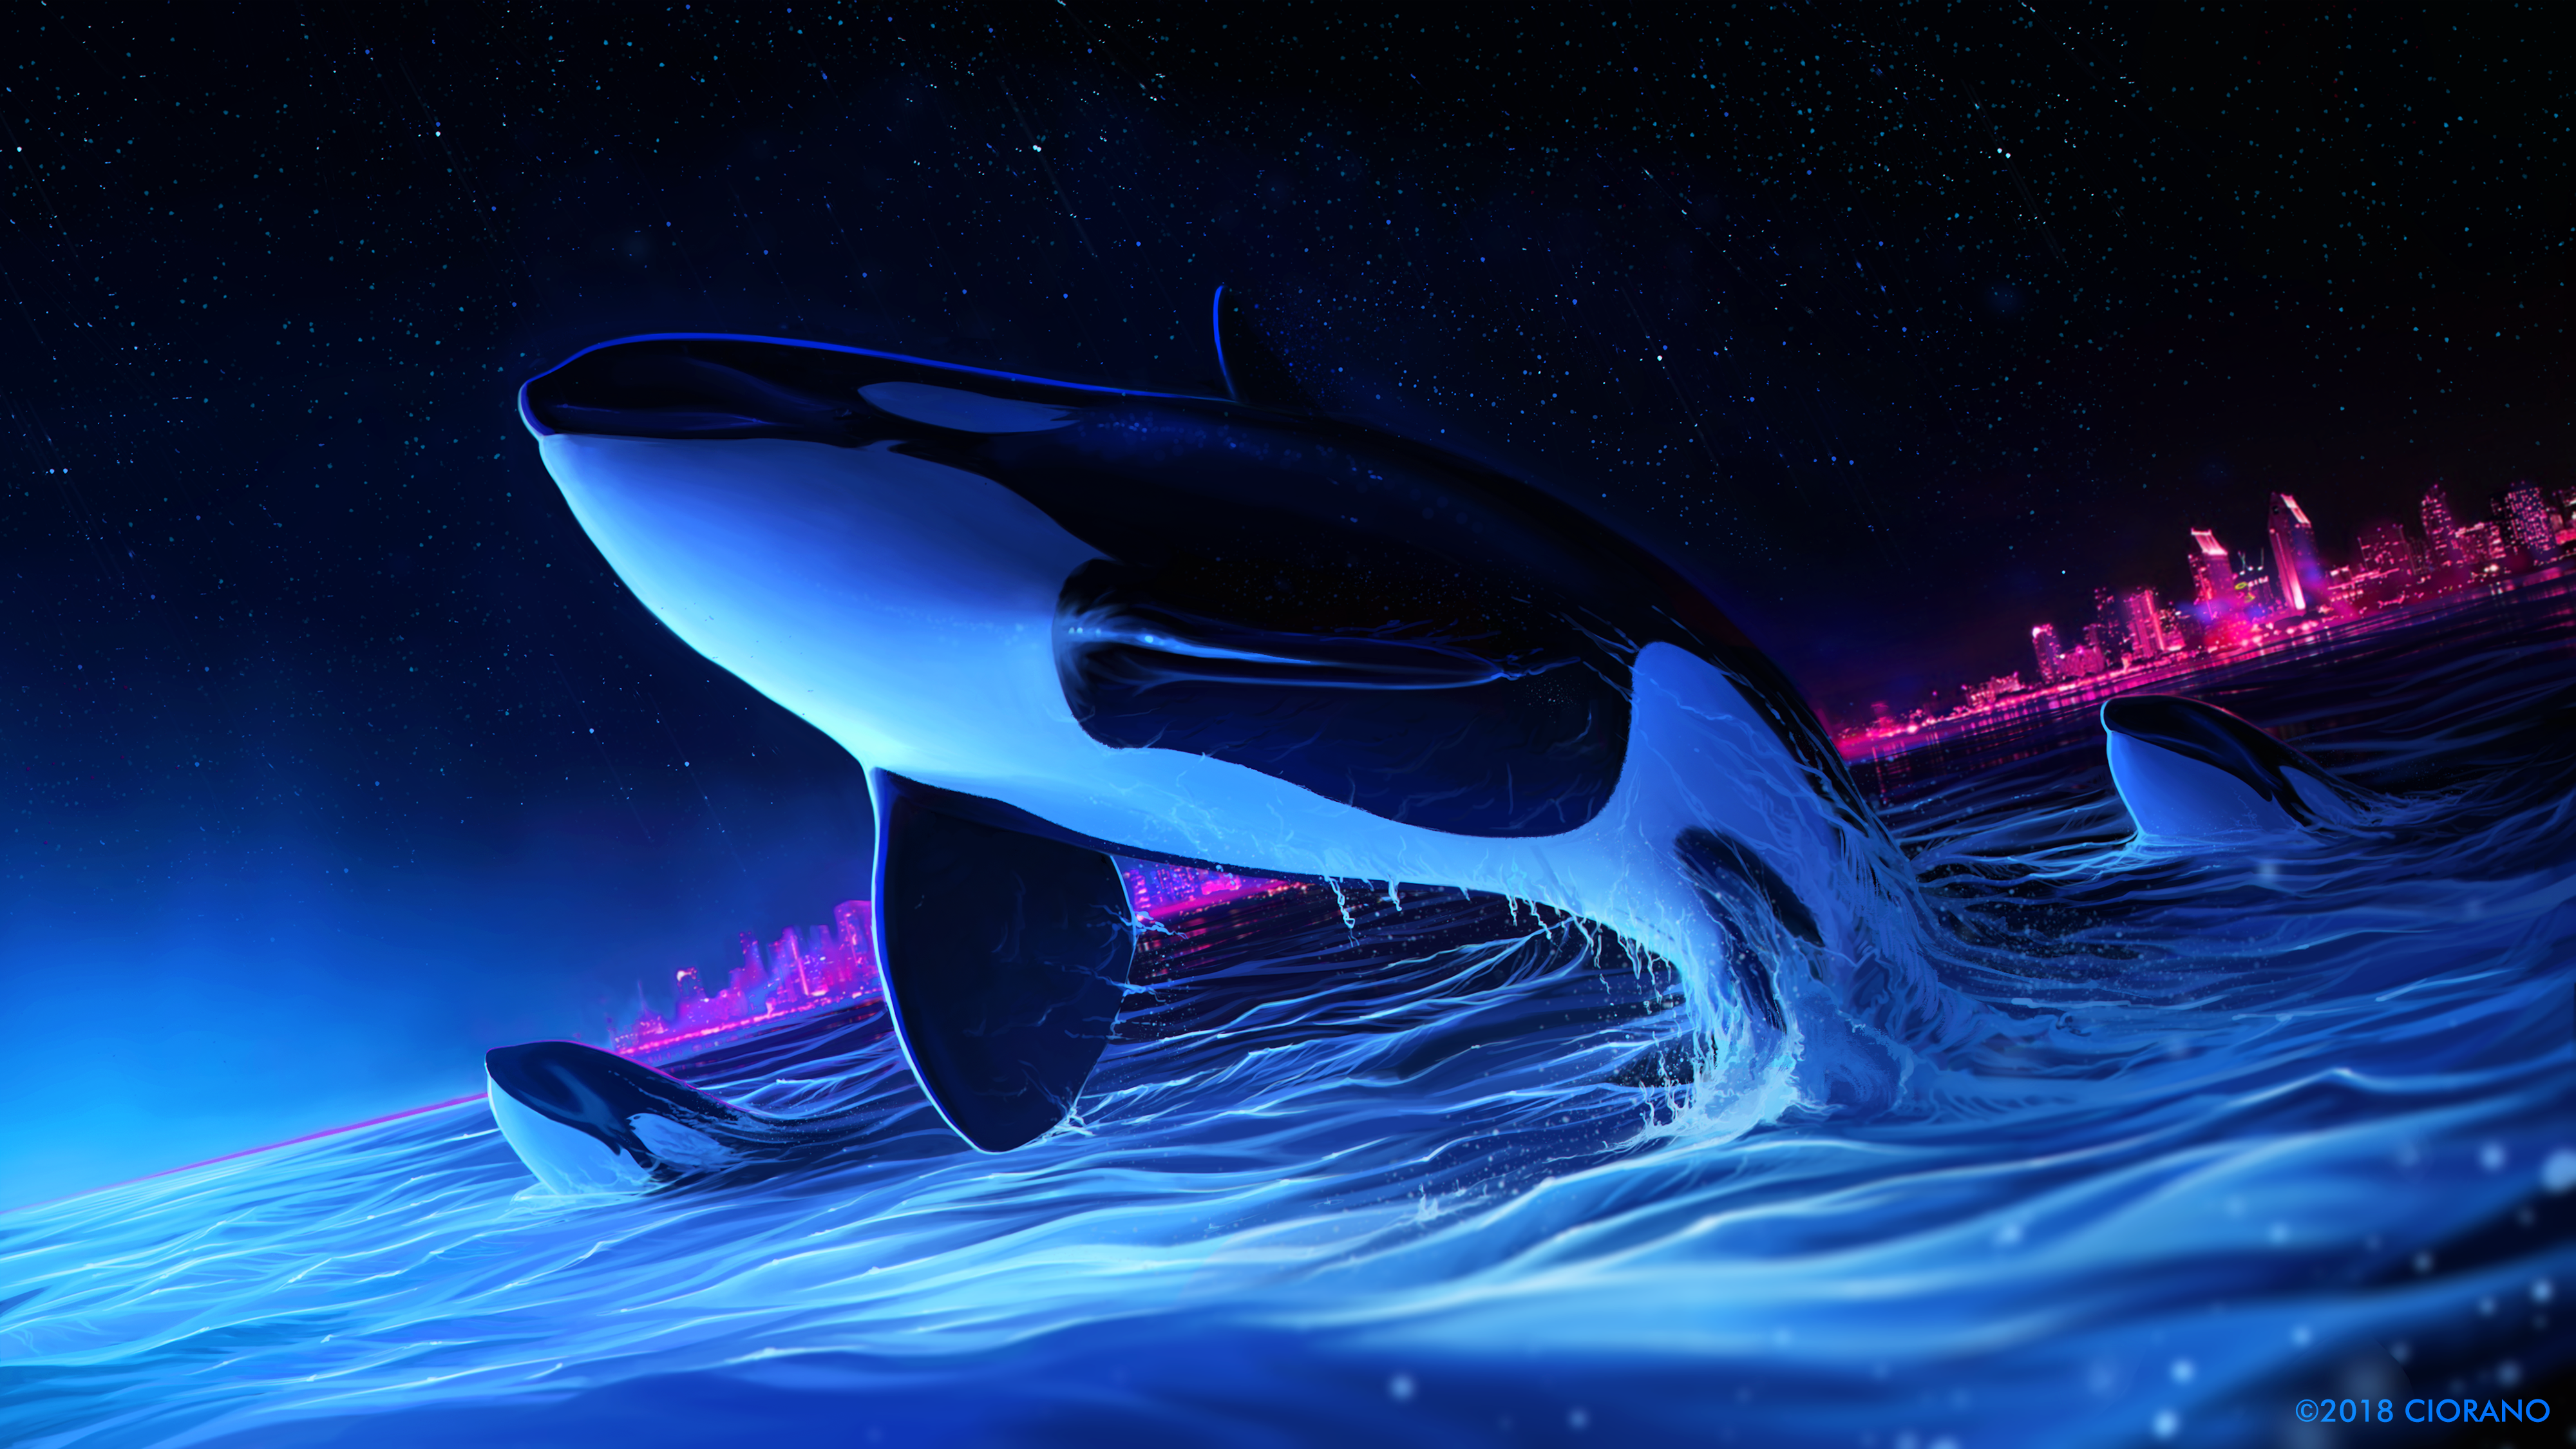 General 4000x2250 digital art artwork illustration drawing digital painting animals whale orca night sky night sky skyscape landscape nature stars starry night starred sky water sea lights fantasy art city cityscape city lights architecture building dolphin blue pink